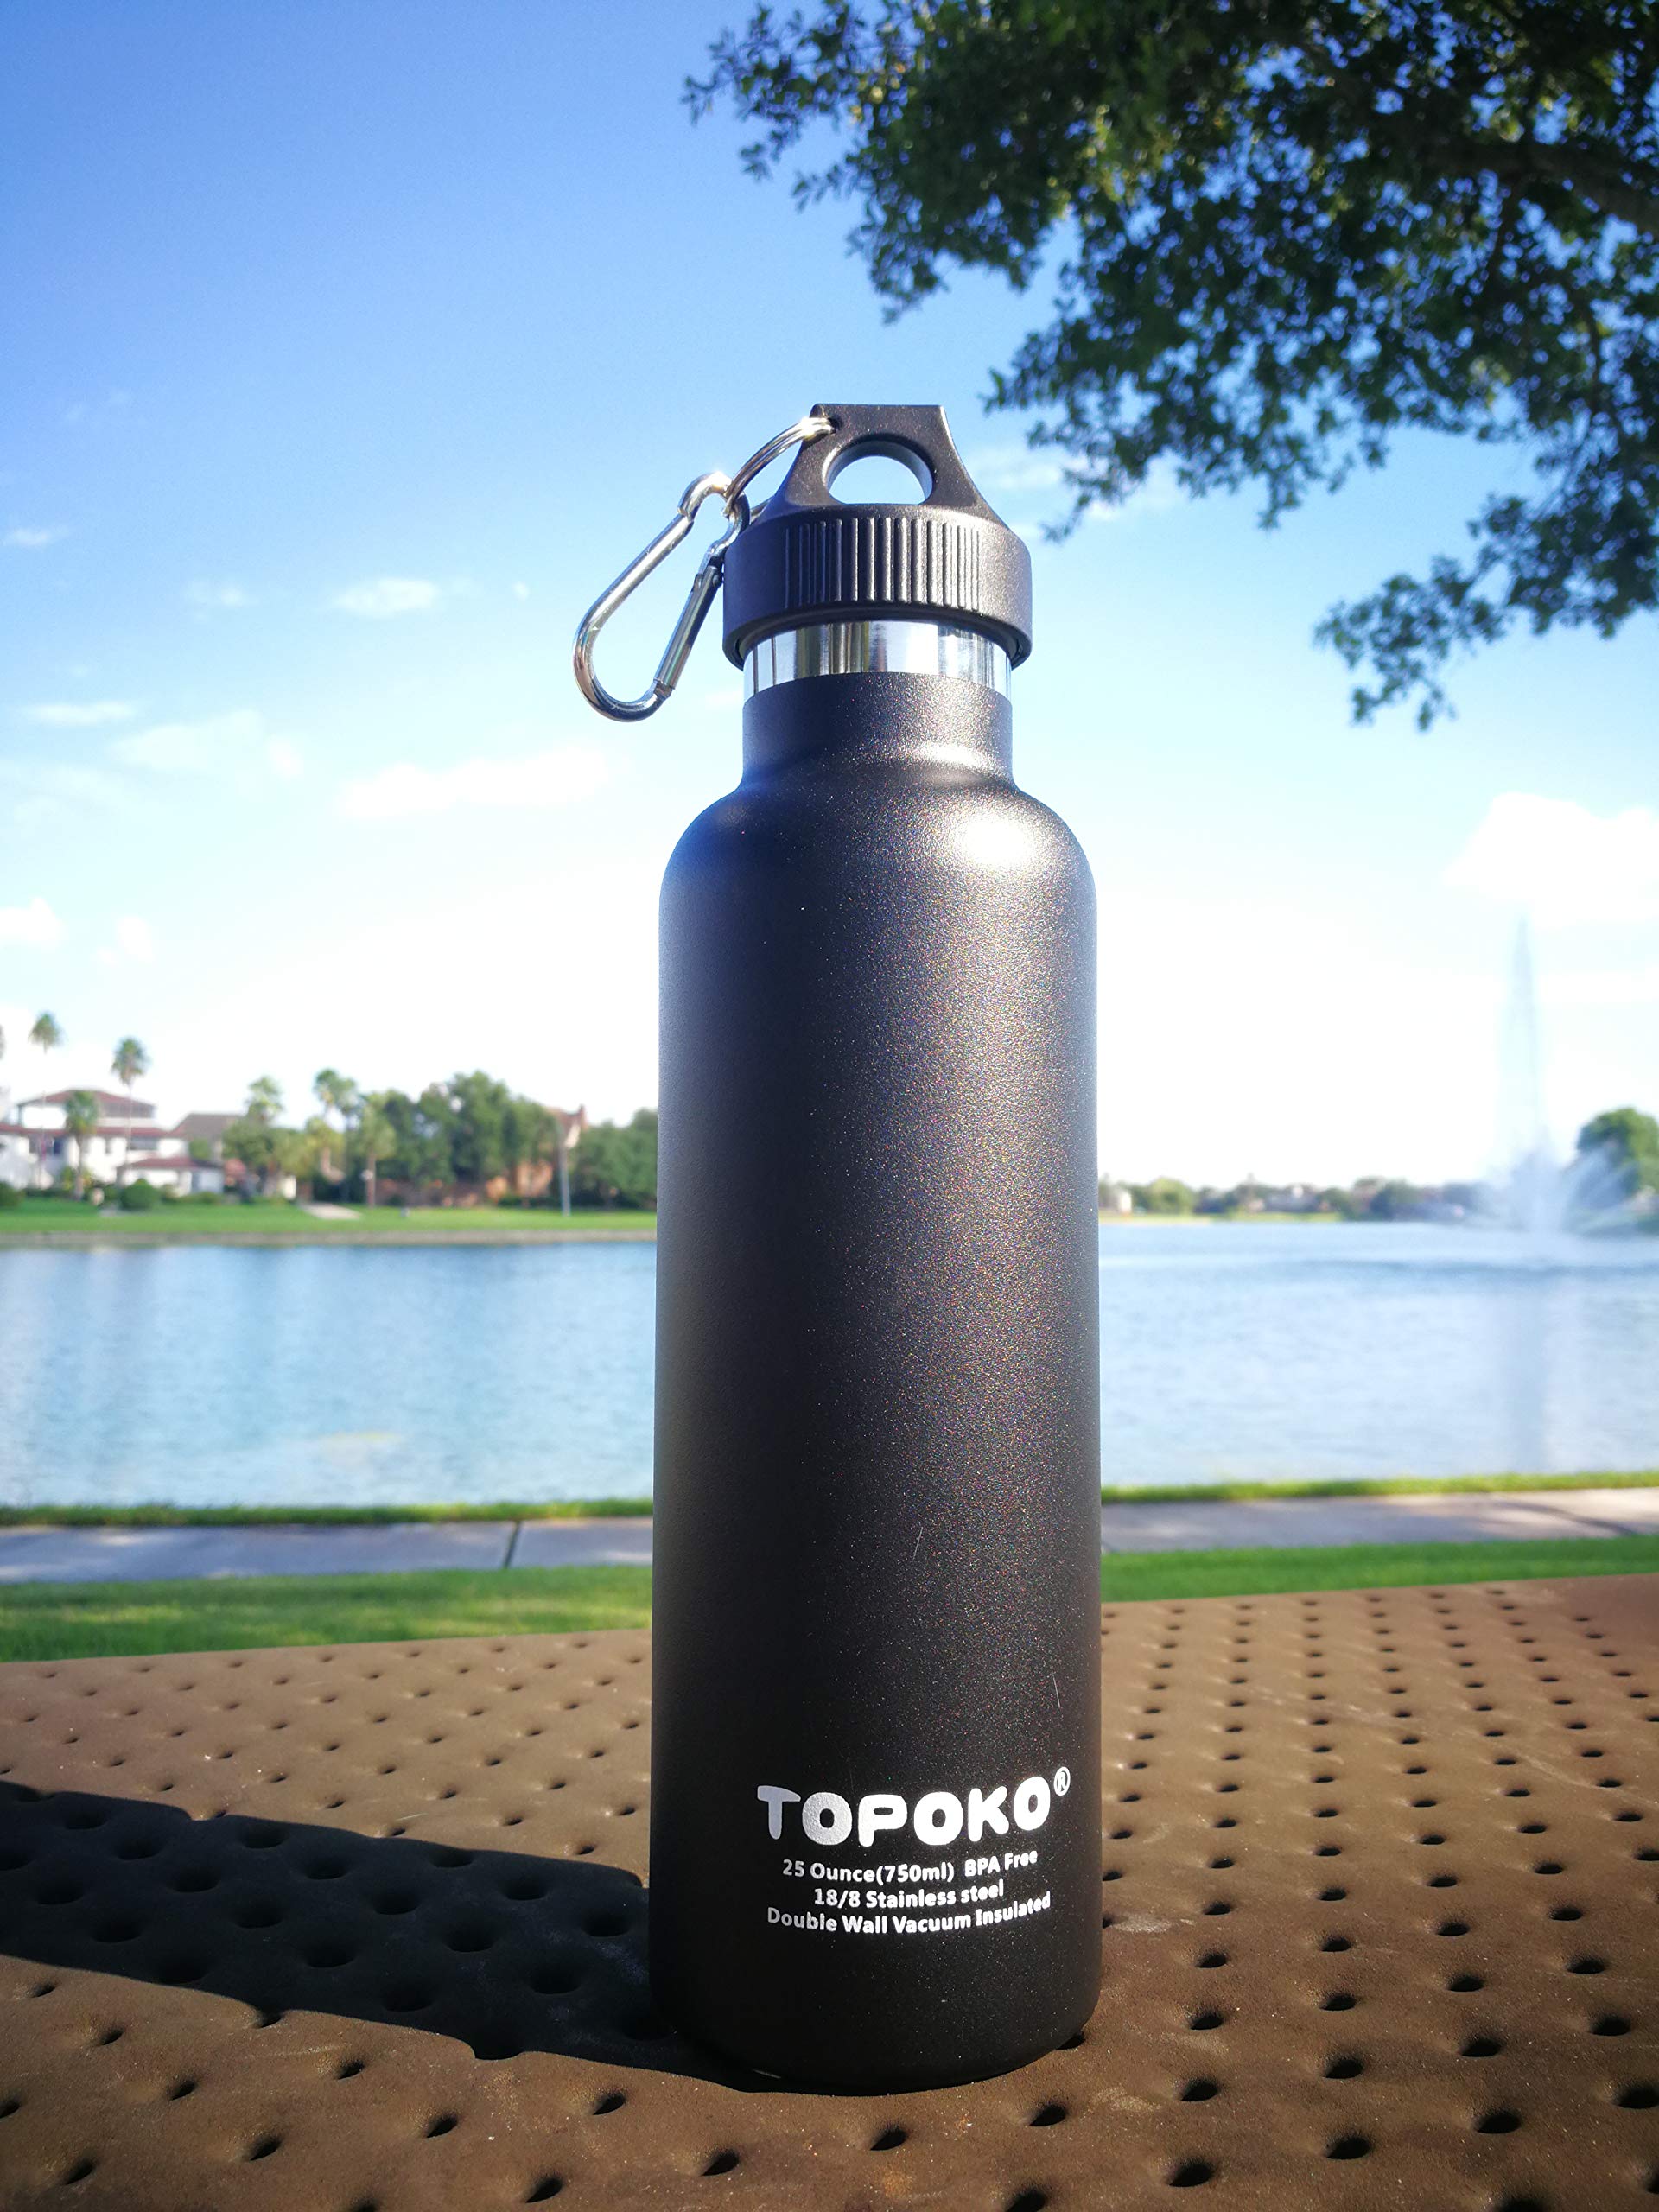 TOPOKO Colored Non-Rusty Stainless Steel Vacuum Water Bottle Double Wall Insulated Thermos, Sports Hike Travel, Leak Proof, BPA Free, 25 oz, Grey (Black)